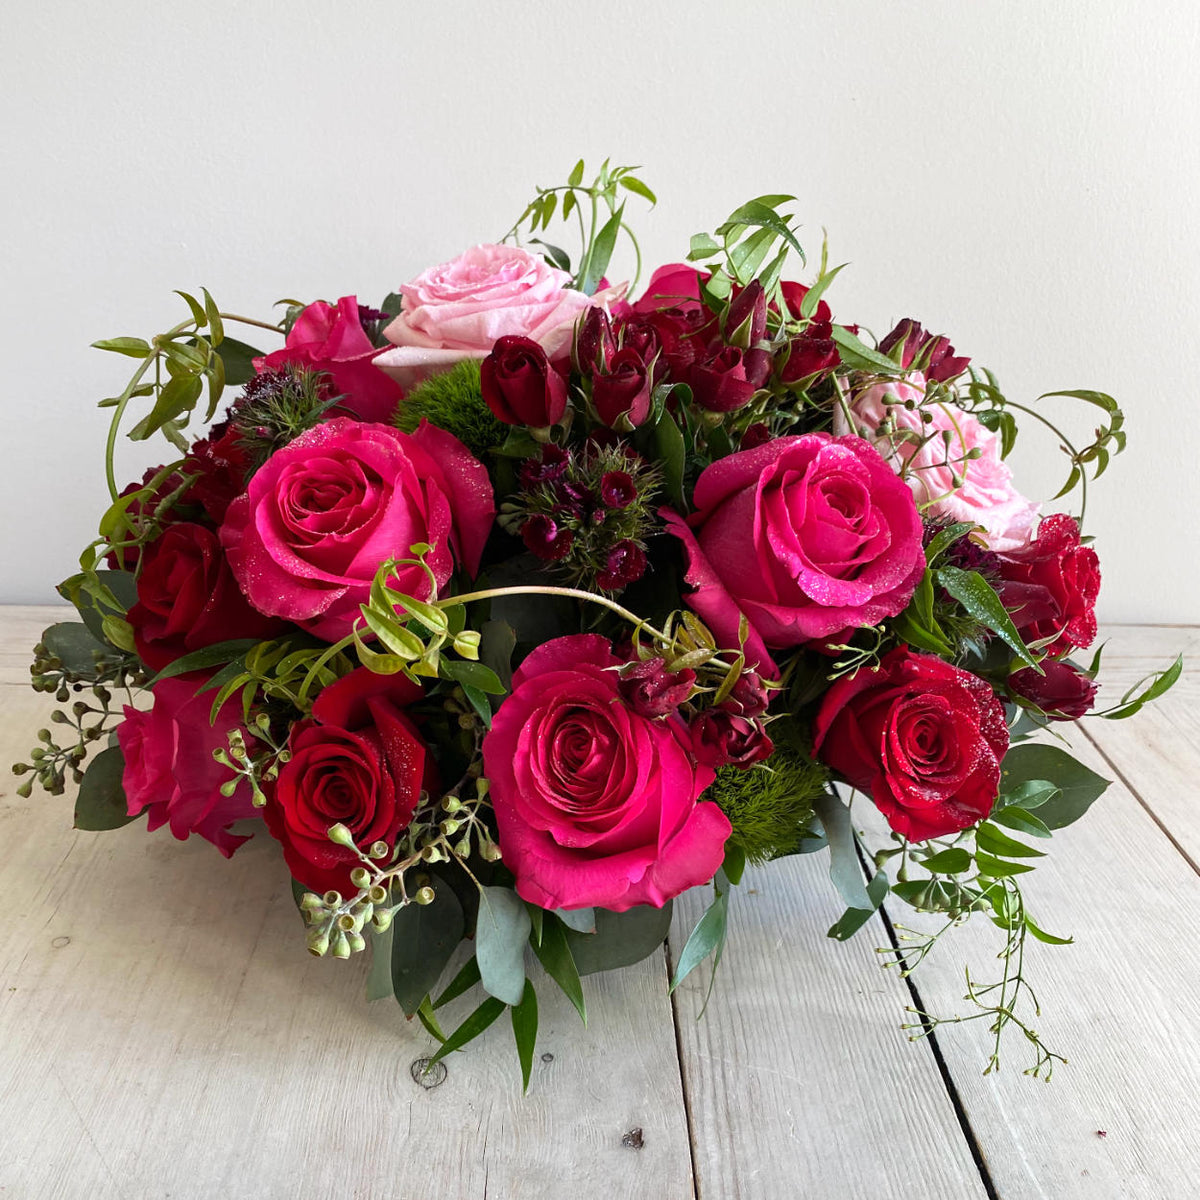 A Jaw-dropping floral design that showcases the pure beauty of a rose. A stunning arrangement of paved mixed roses and greens. Featuring red hearts roses. Pink Floyd Roses and romantic O&#39;Hara garden roses. Topped with a touch of glitter.